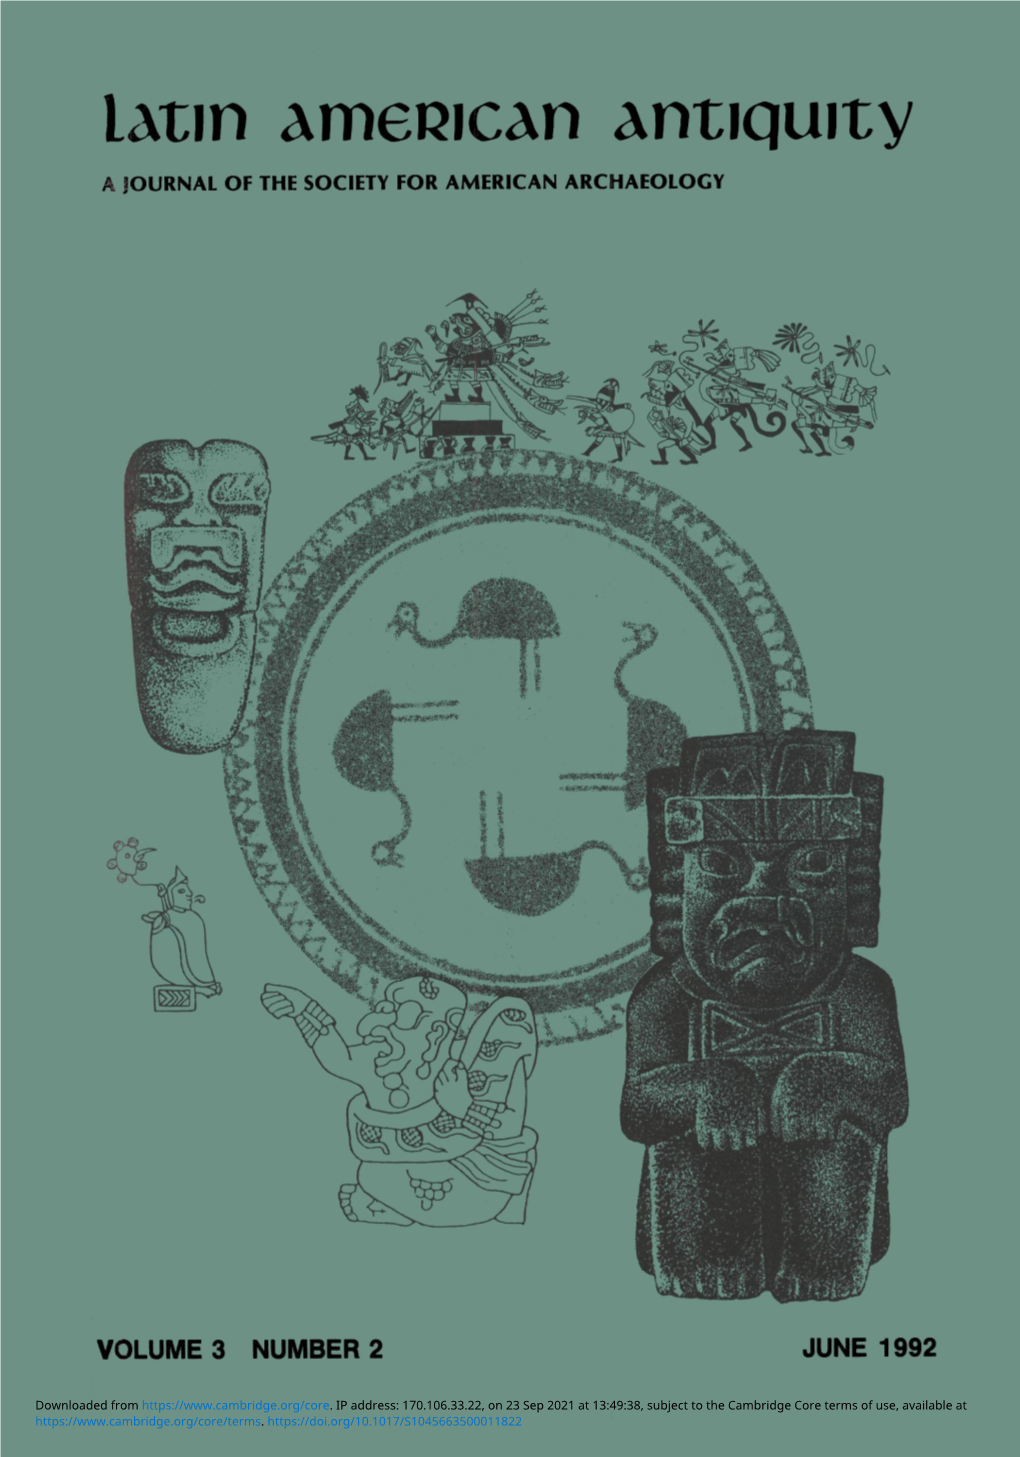 Latin American Antiquity a JOURNAL of the SOCIETY for AMERICAN ARCHAEOLOGY